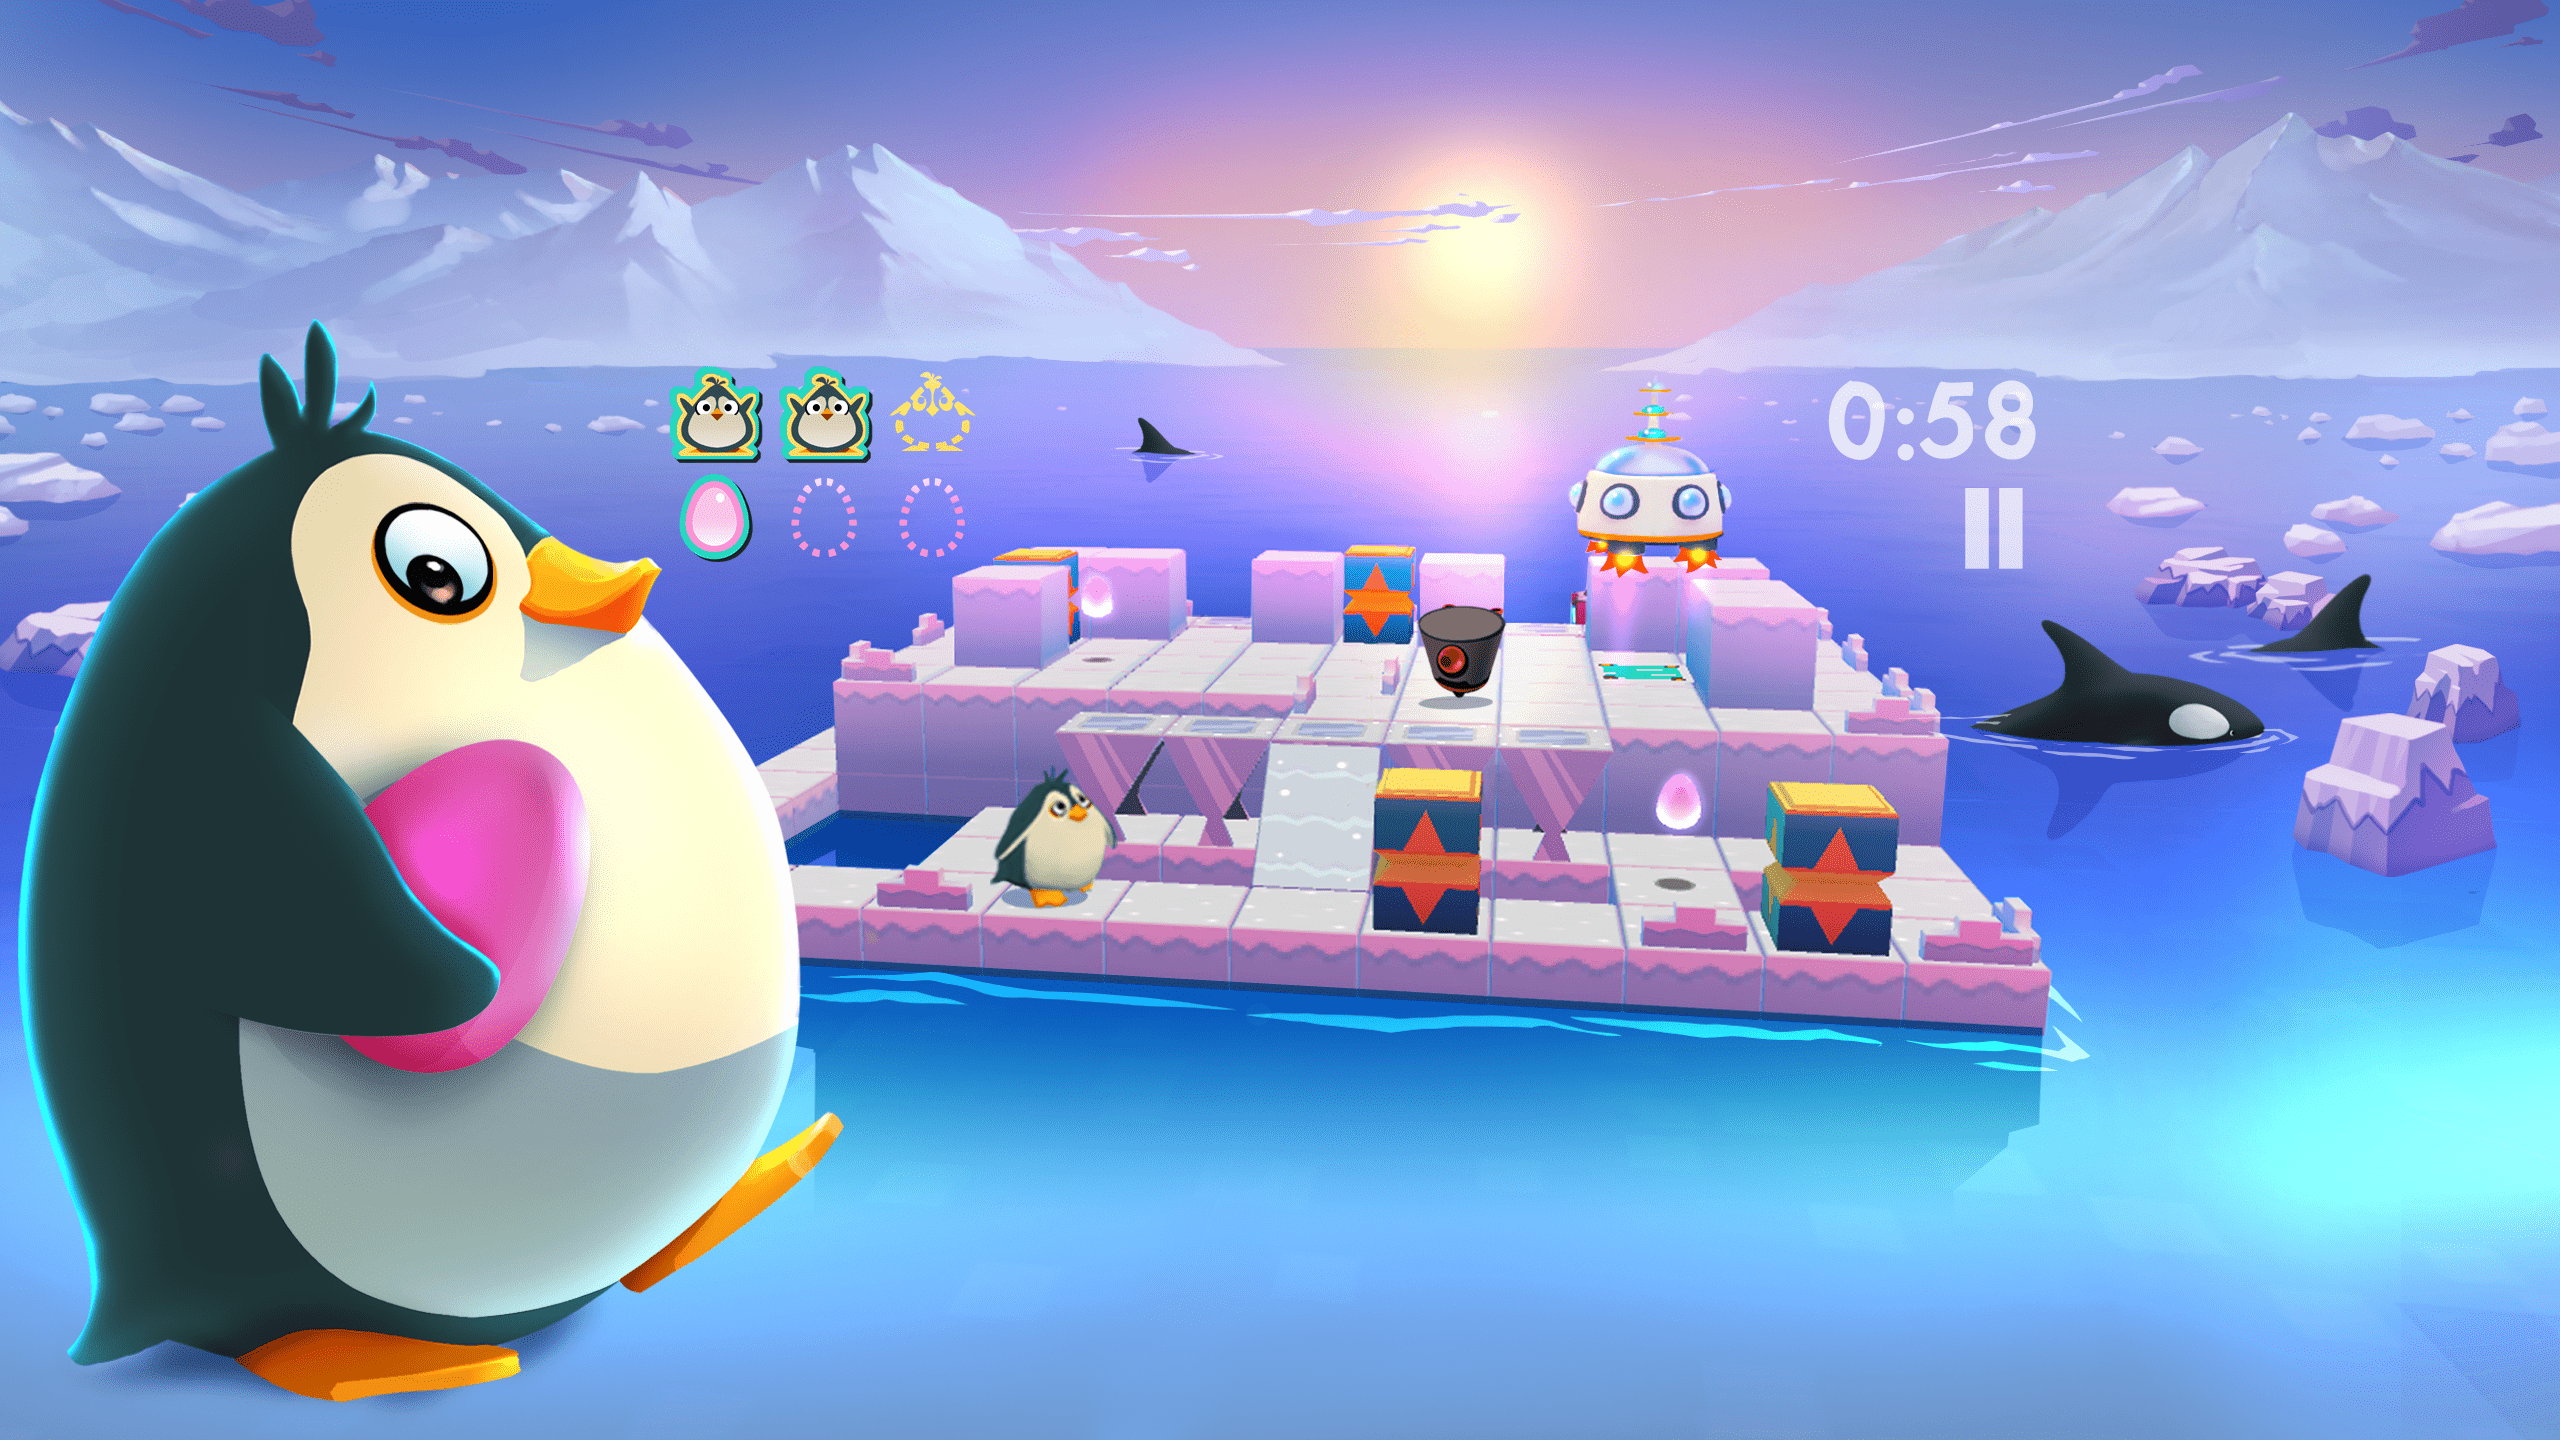 Waddle Home PSVR Review – A New Gem Or Left Feeling Frosty?